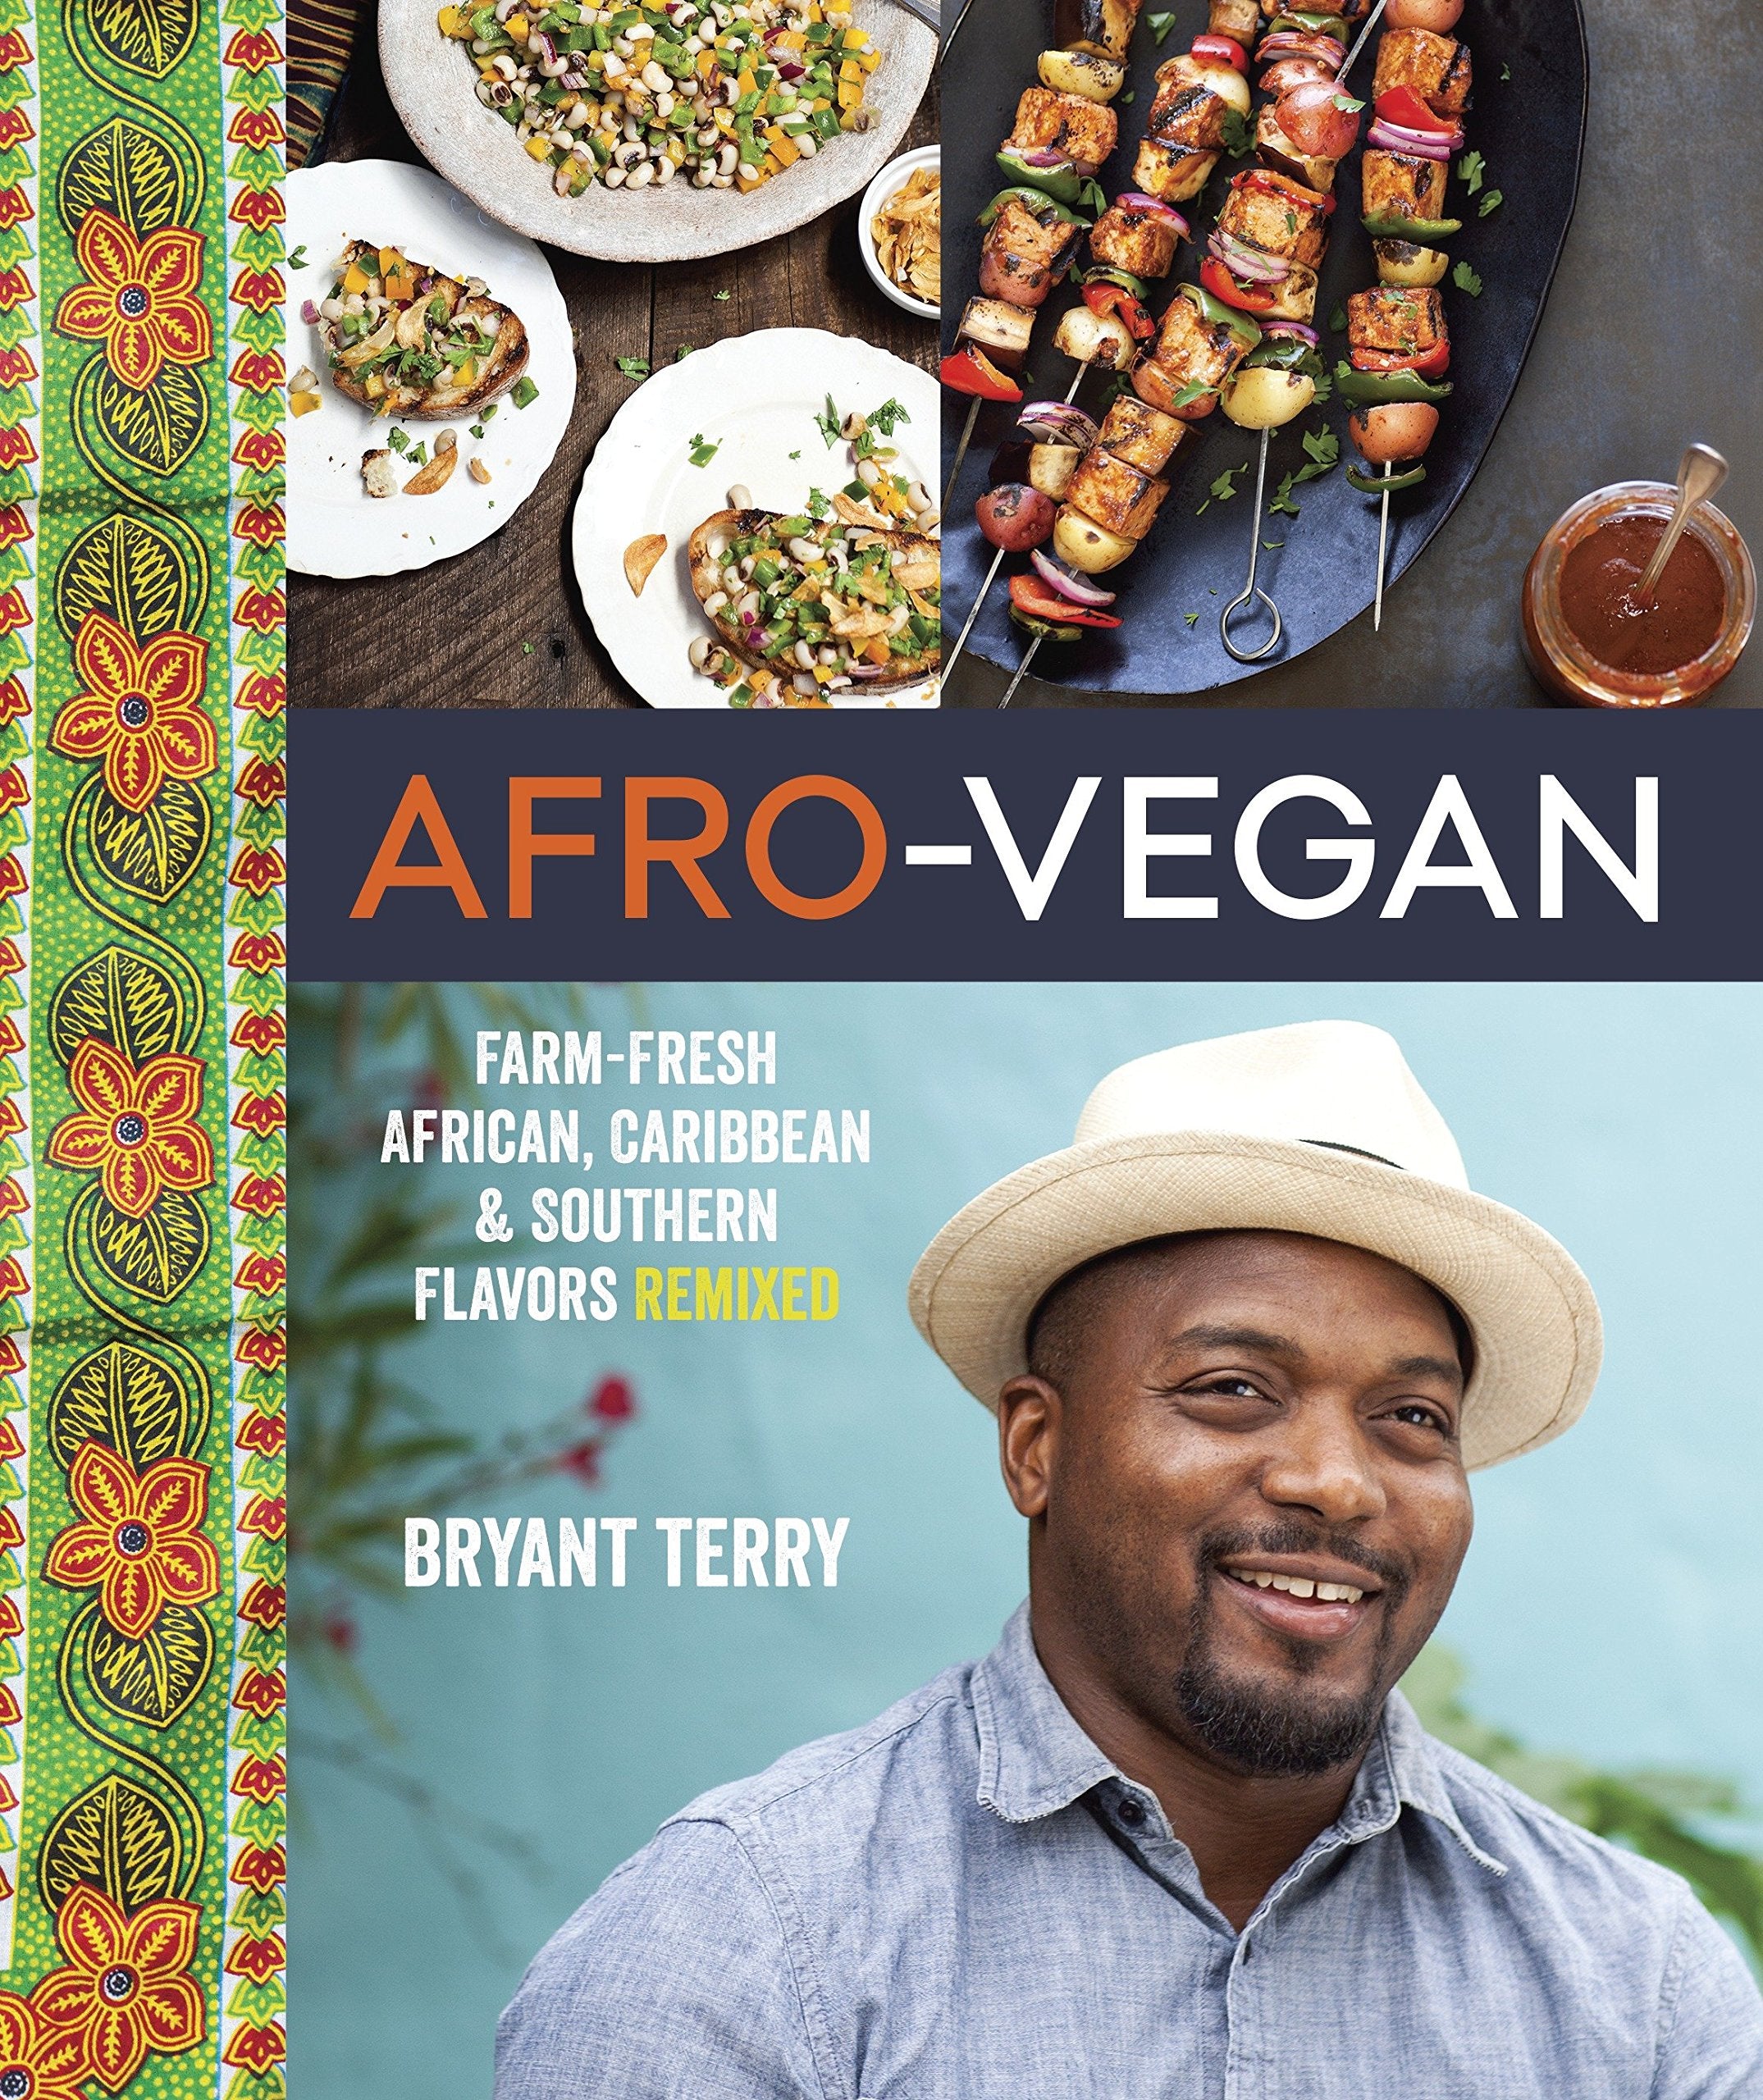 Afro-Vegan: Farm-Fresh African, Caribbean, and Southern Flavors Remixed [A Cookbook] Hardcover